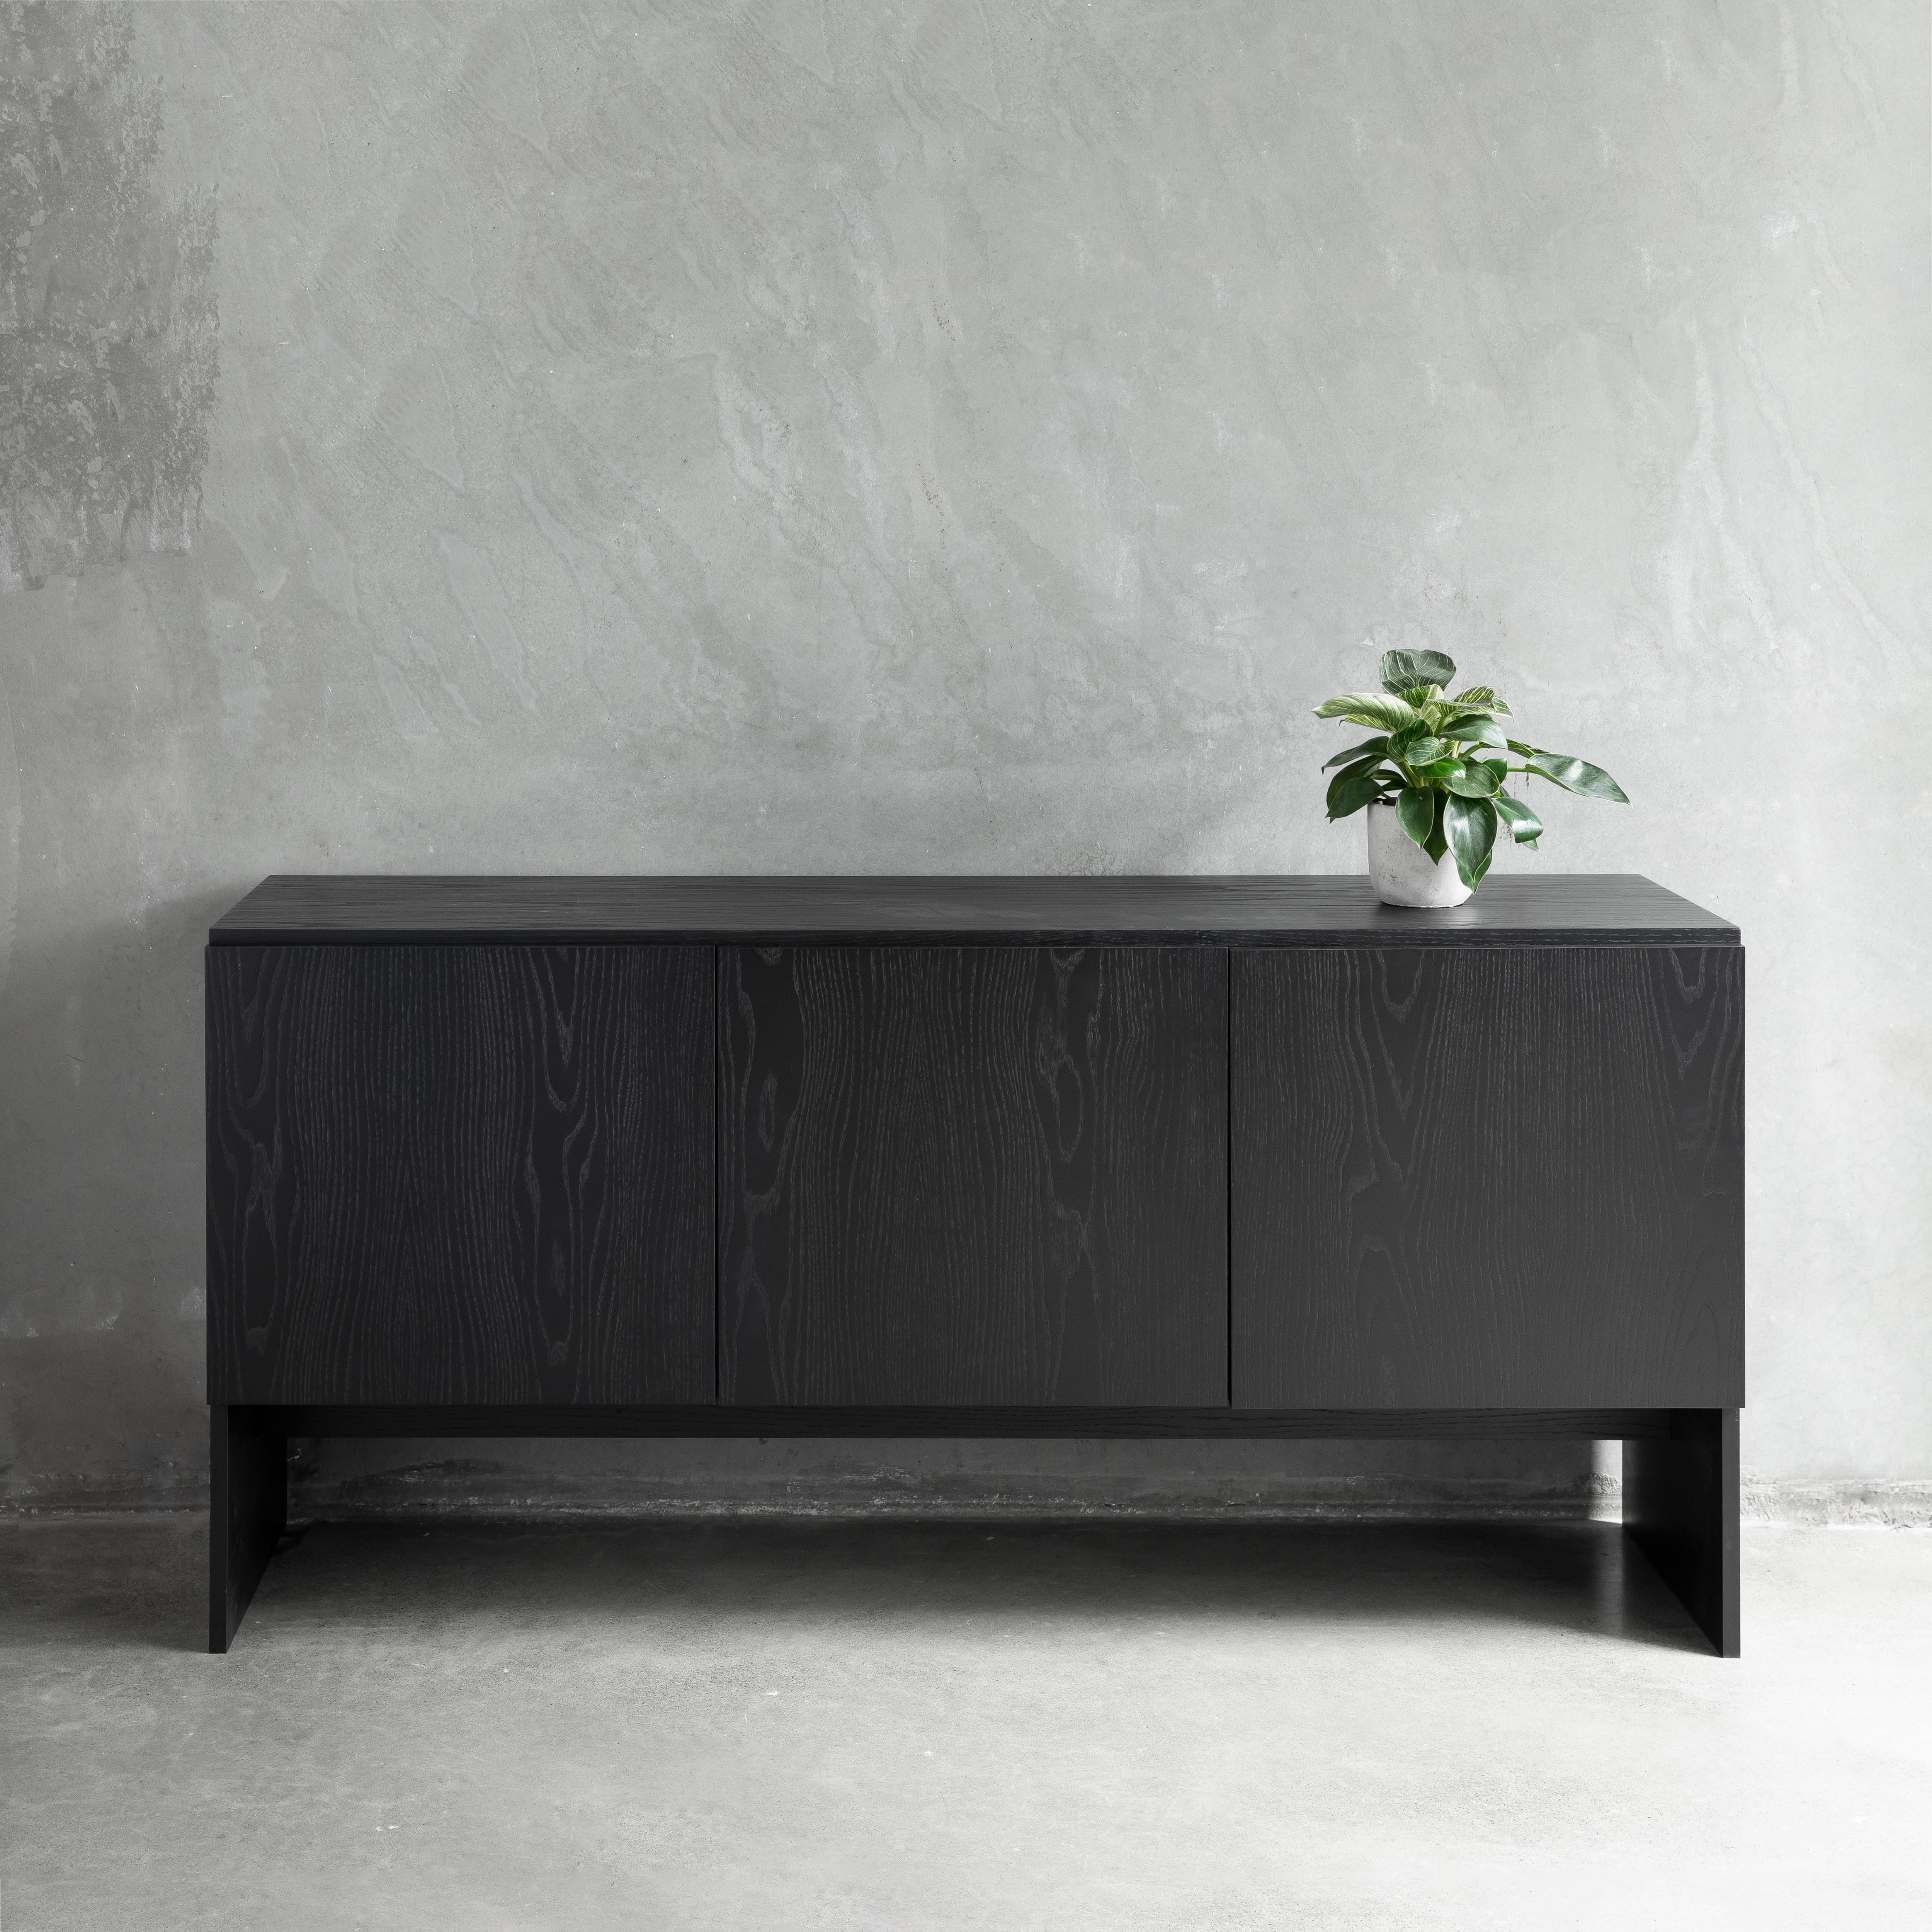 Simple in design yet sophisticated in presence, the Slab Credenza is a modern storage solution suitable for homes and office spaces.

The geometric profile of the credenza combines clean lines and angles, accentuated by the positioning of the